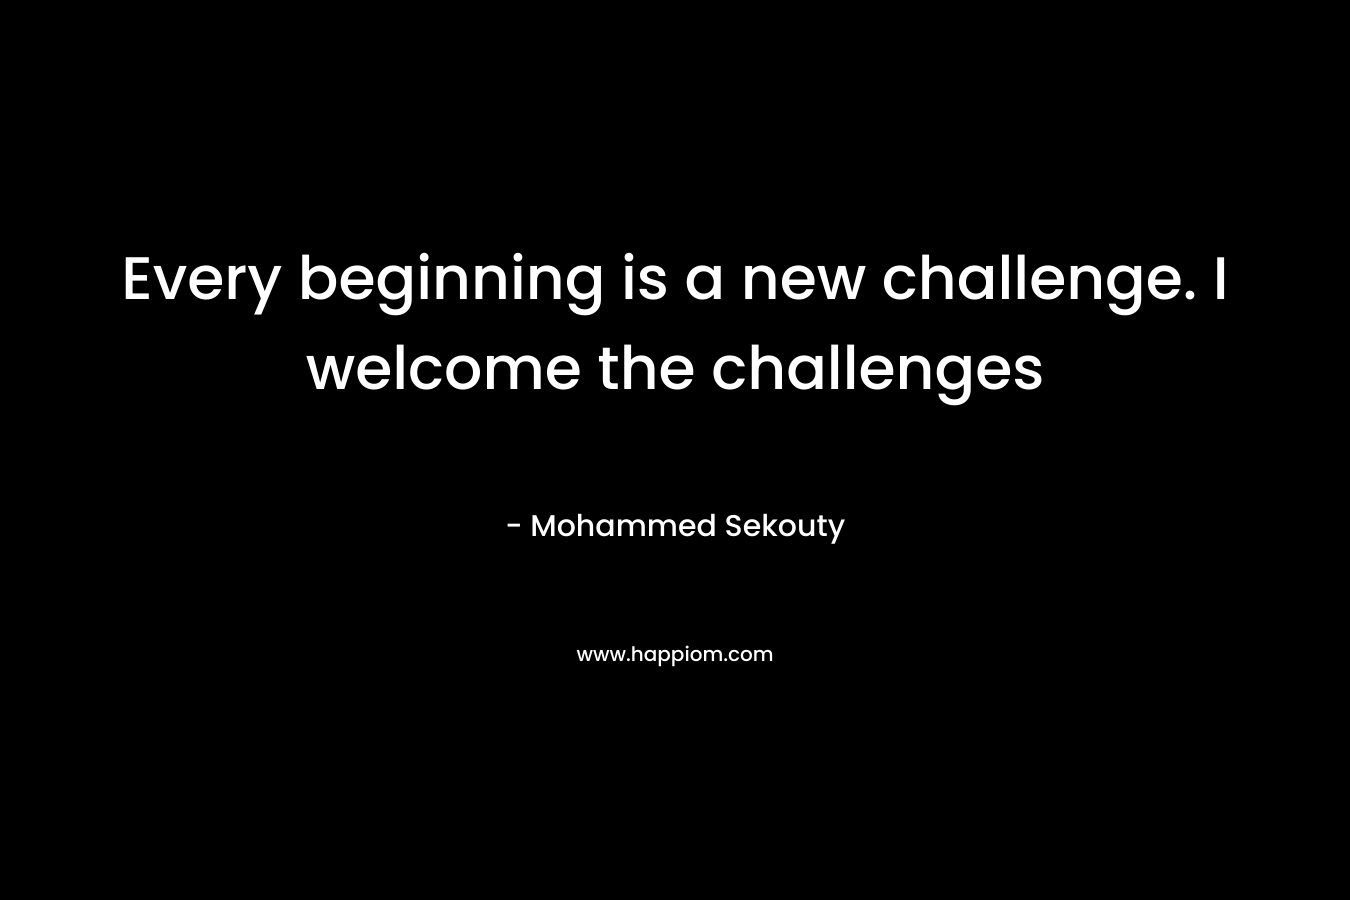 Every beginning is a new challenge. I welcome the challenges